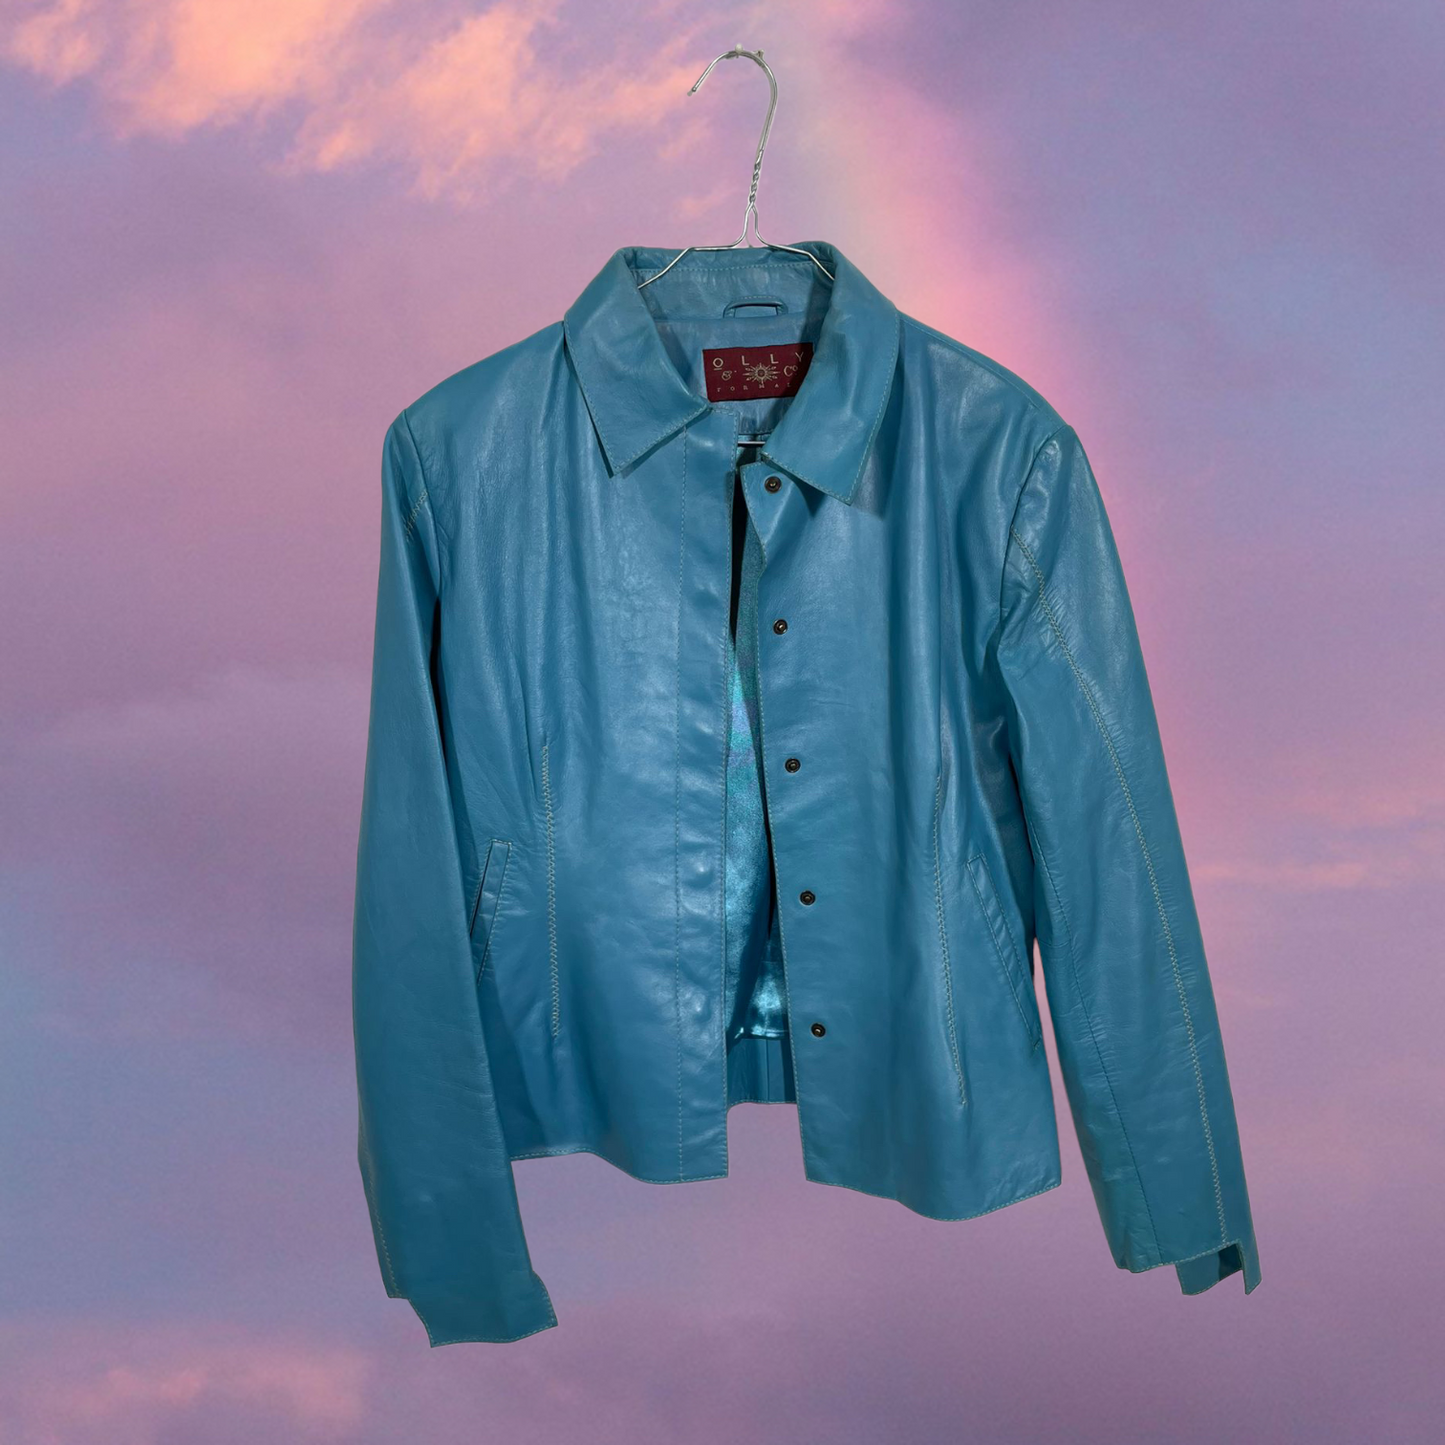 Vintage 2000 Funky Aqua Blue Button Up Leather Jacket with Stitching Details(S)